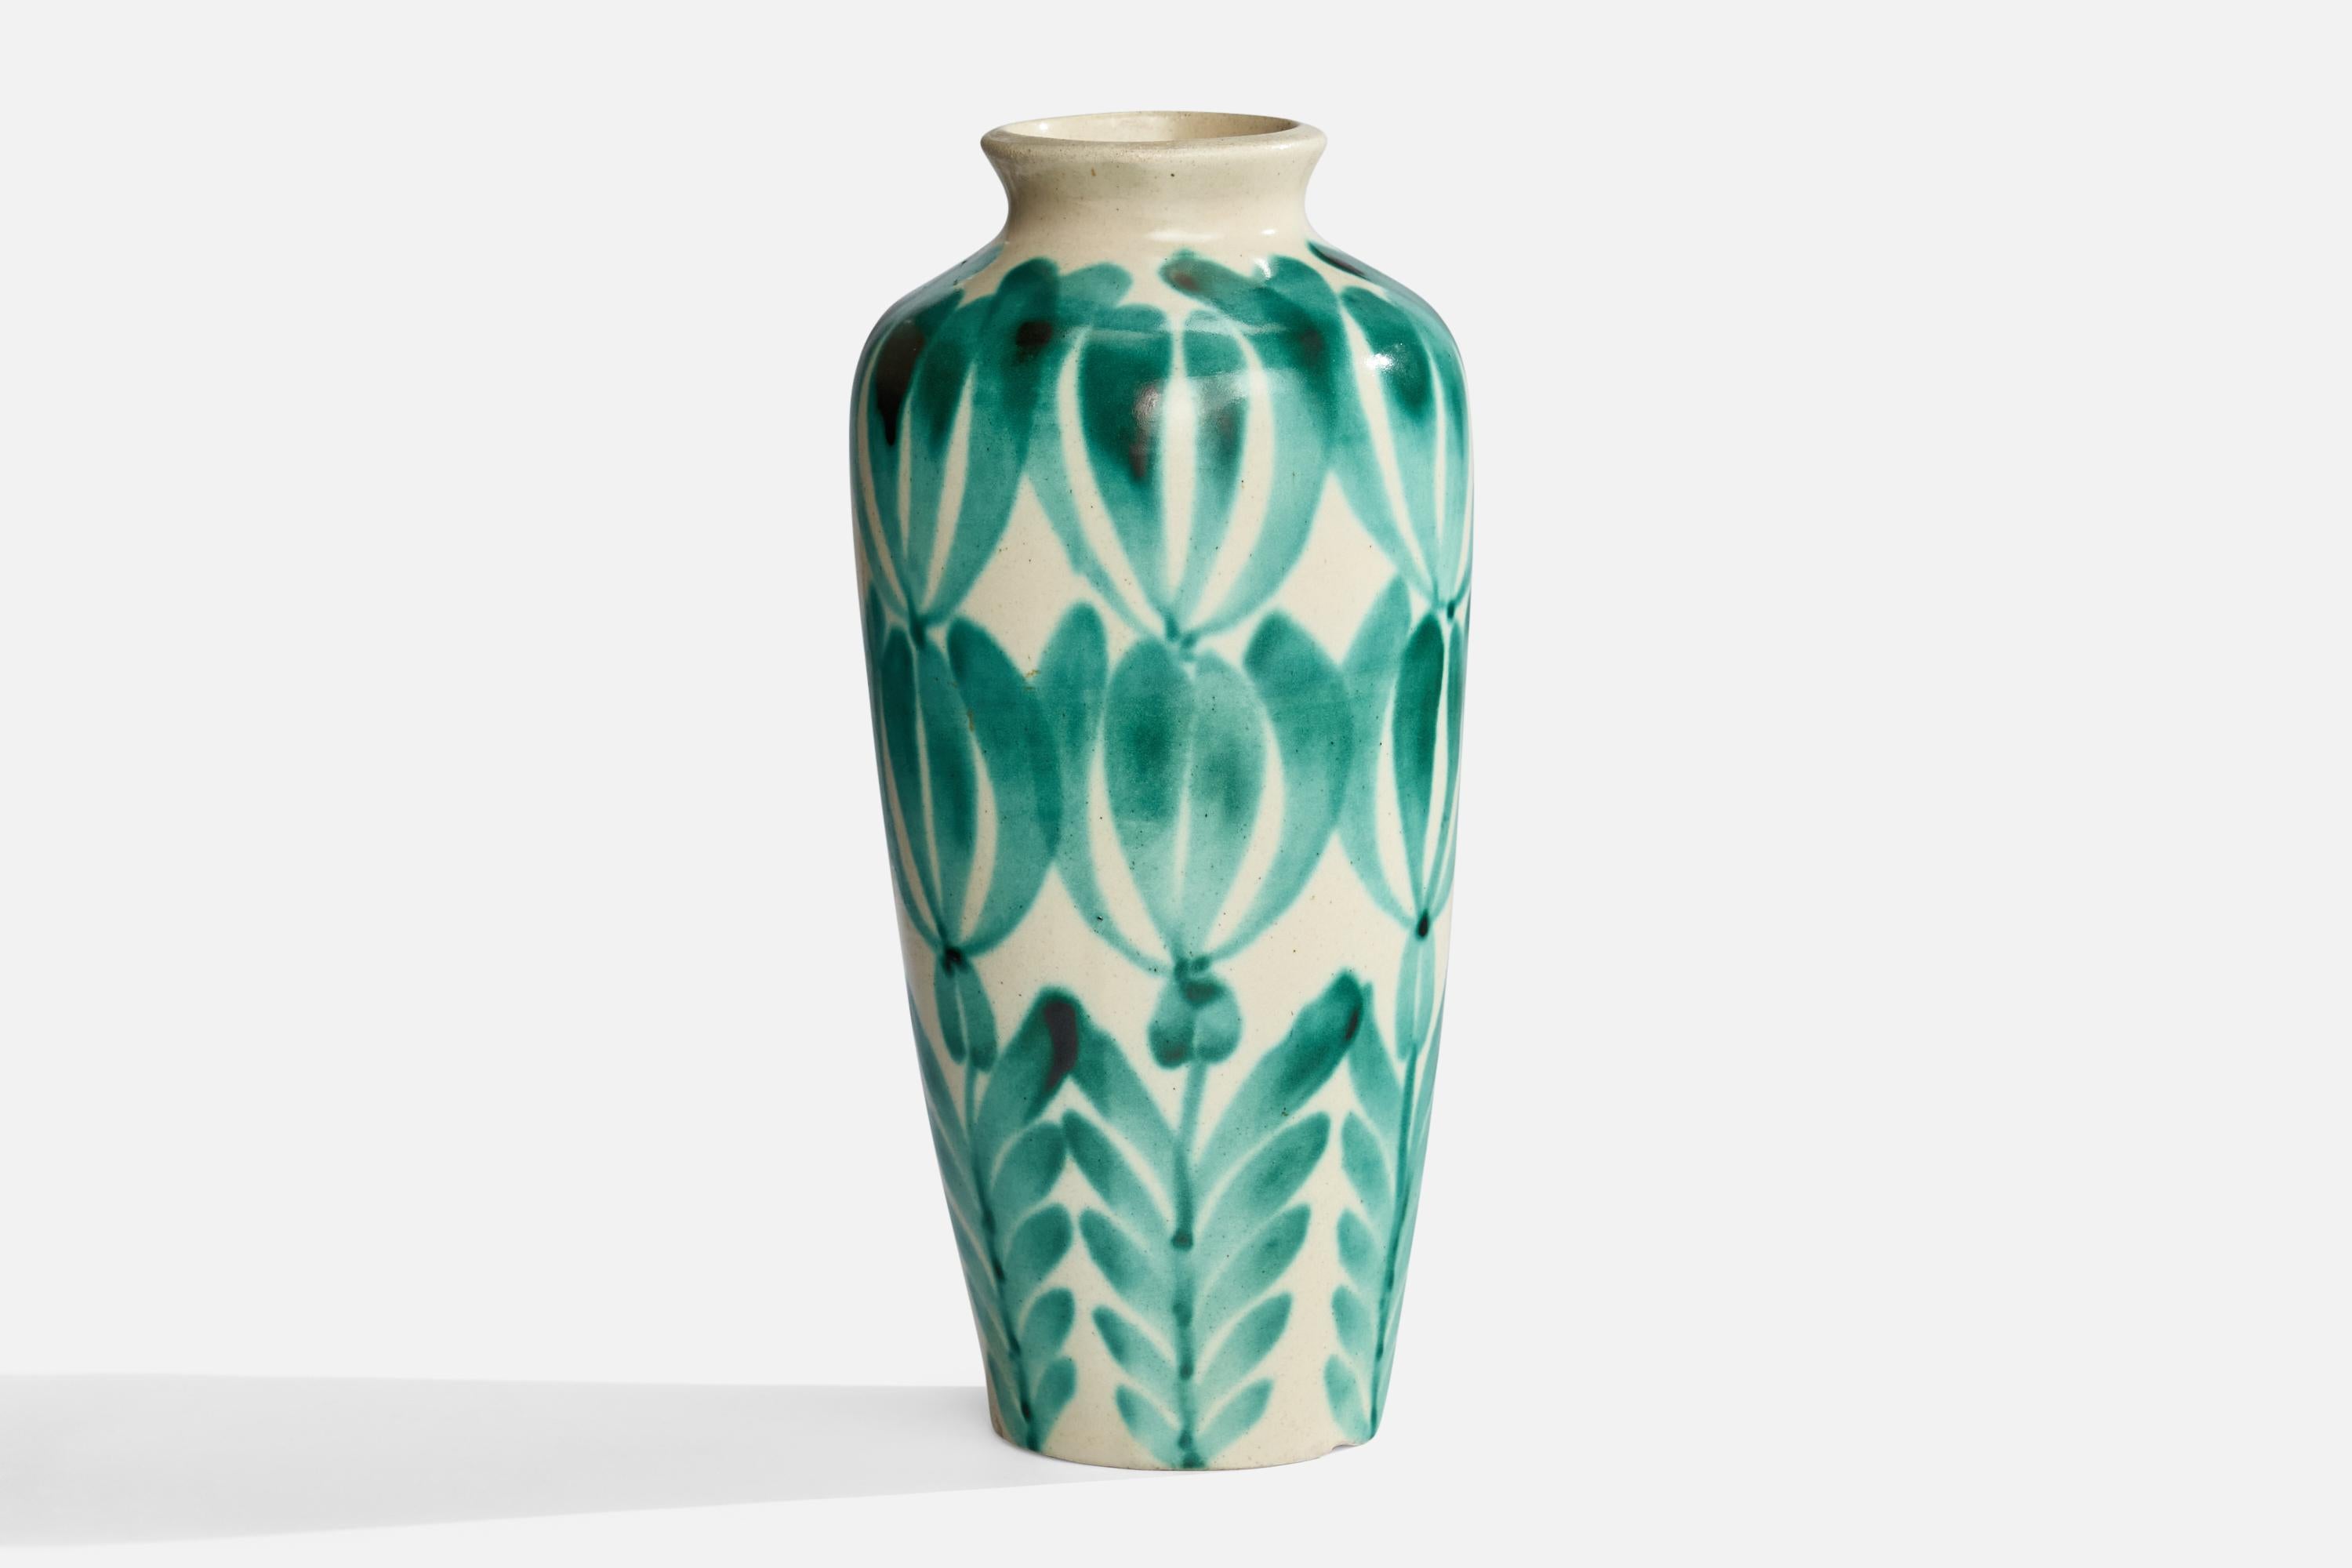 A hand-painted green and off-white vase designed and produced in Sweden, 1940s.